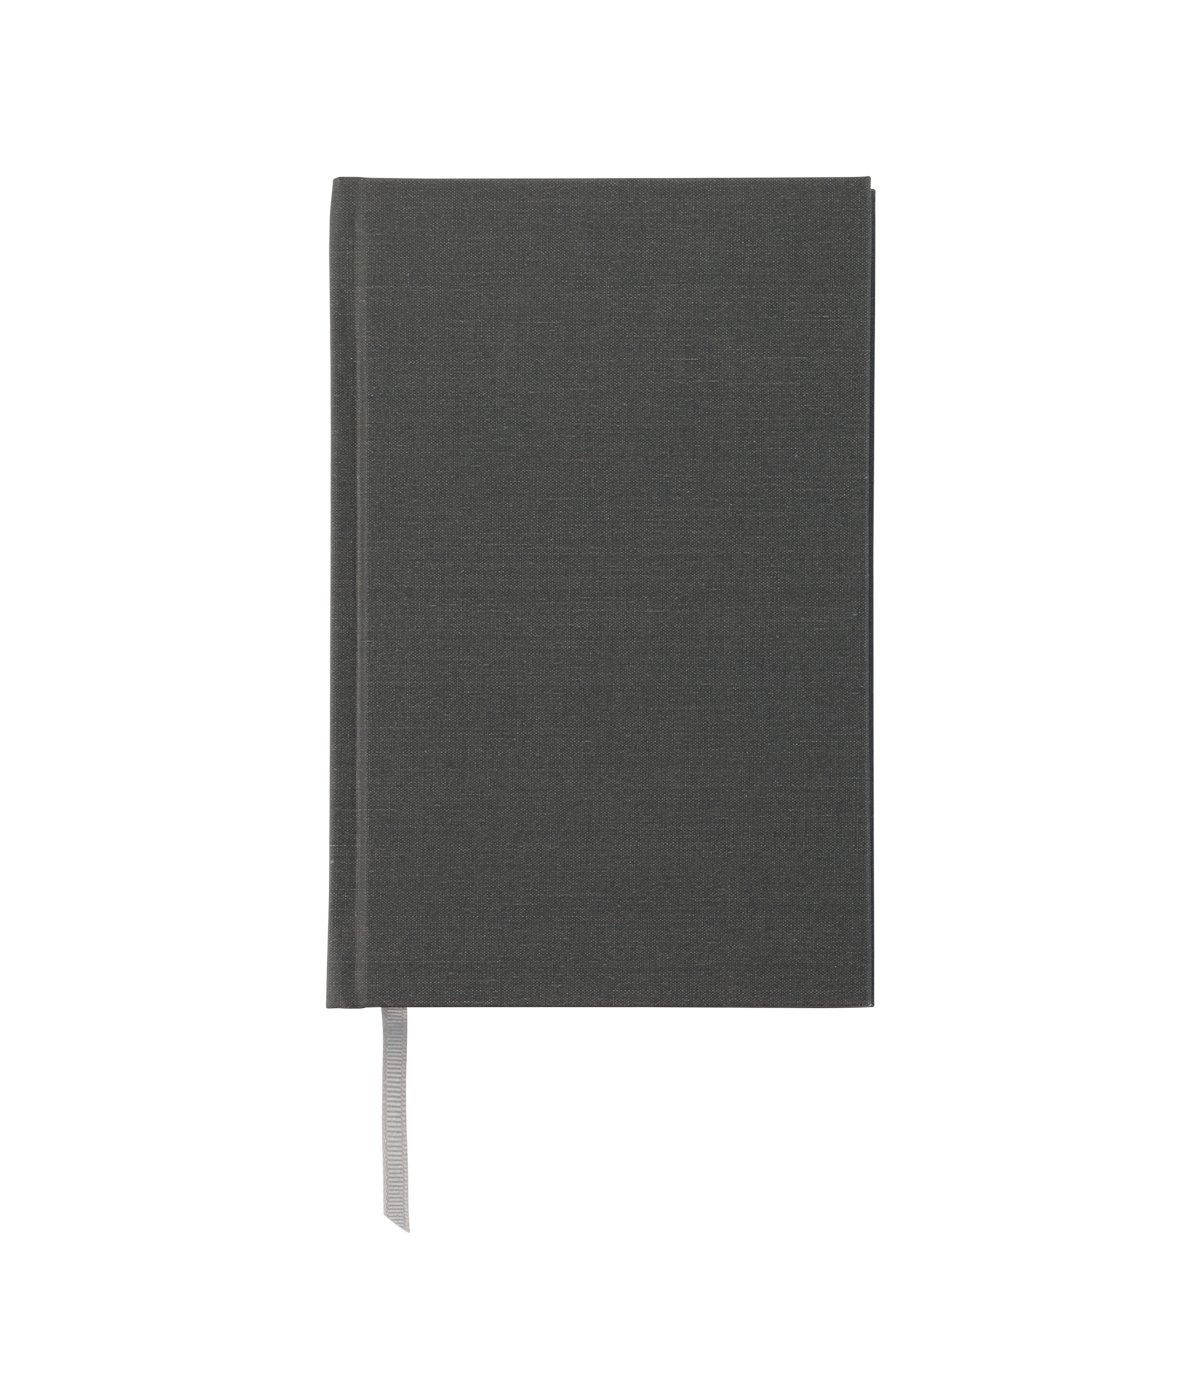 Project Book - Charcoal Gray